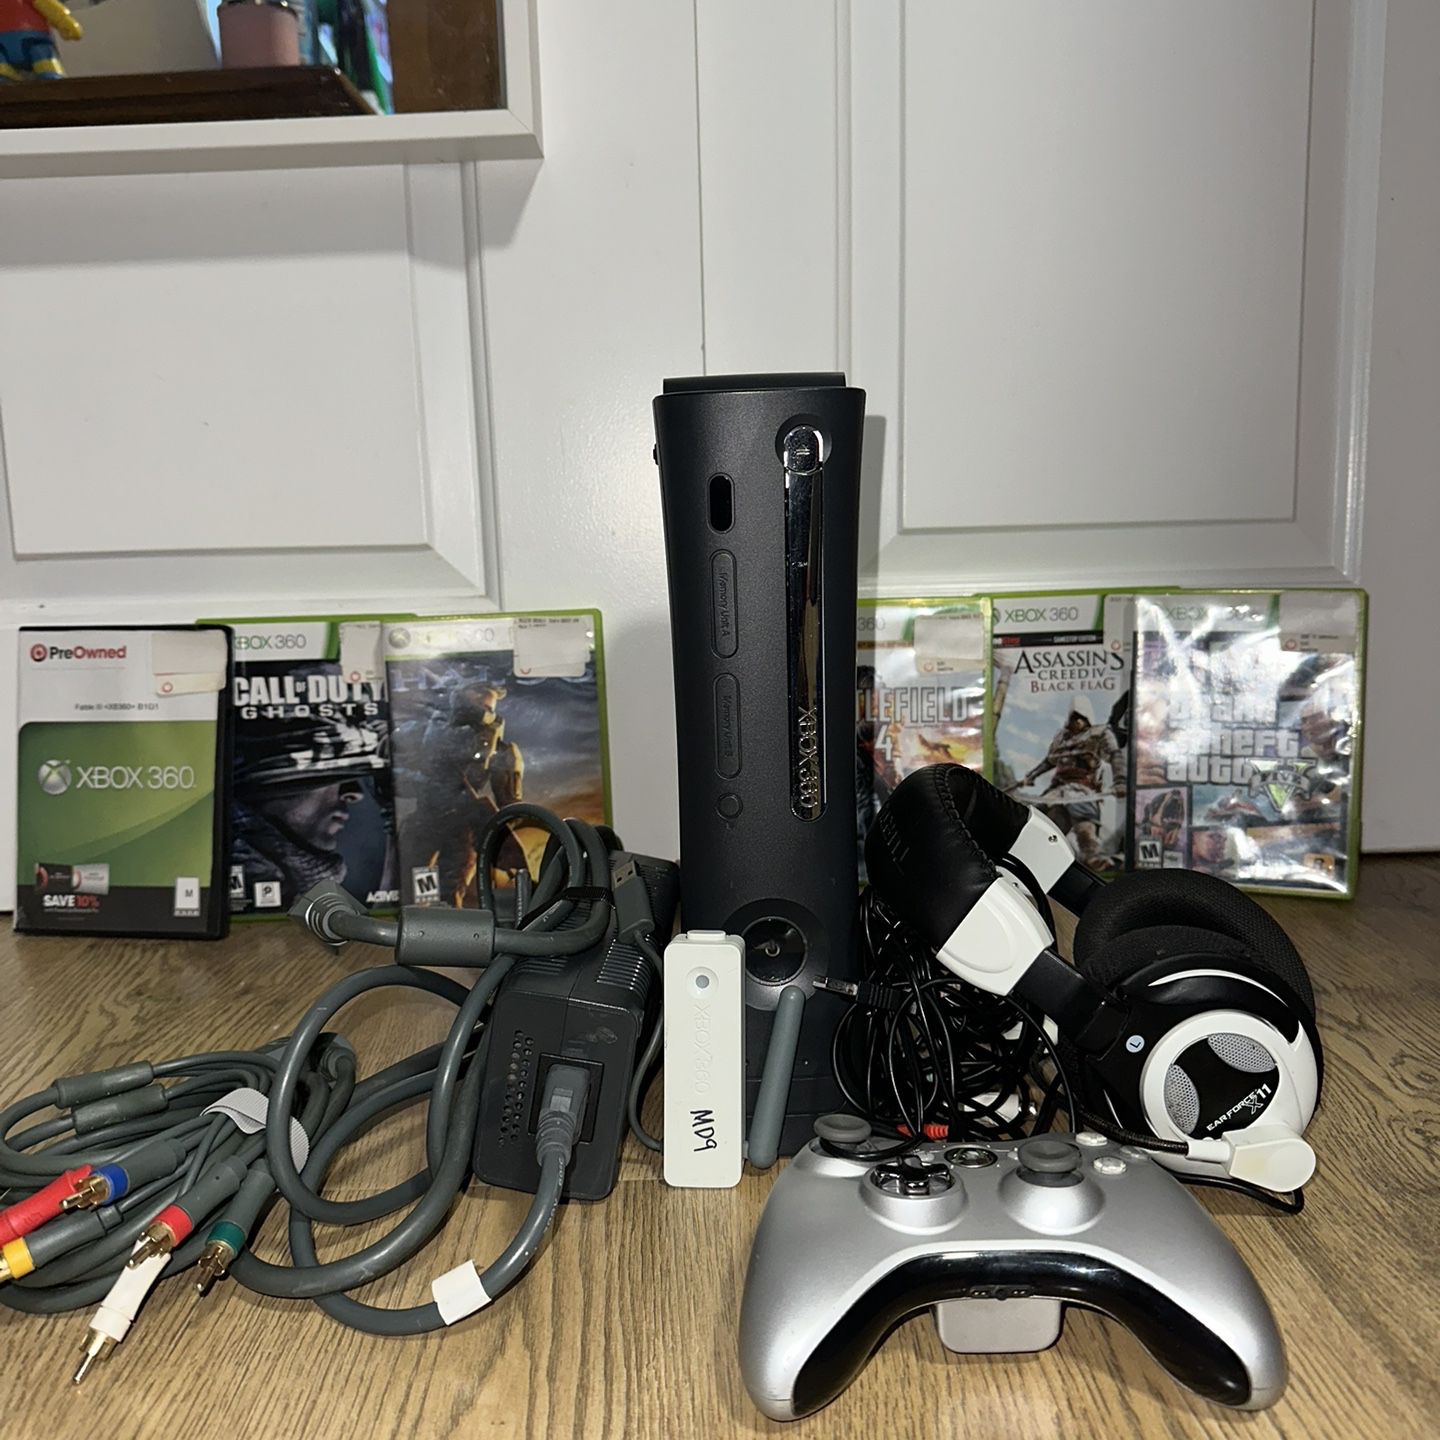 Black Xbox 360 Elite 120 Gb HDD With Controller, Games And Microphone  And More Games In The Console 